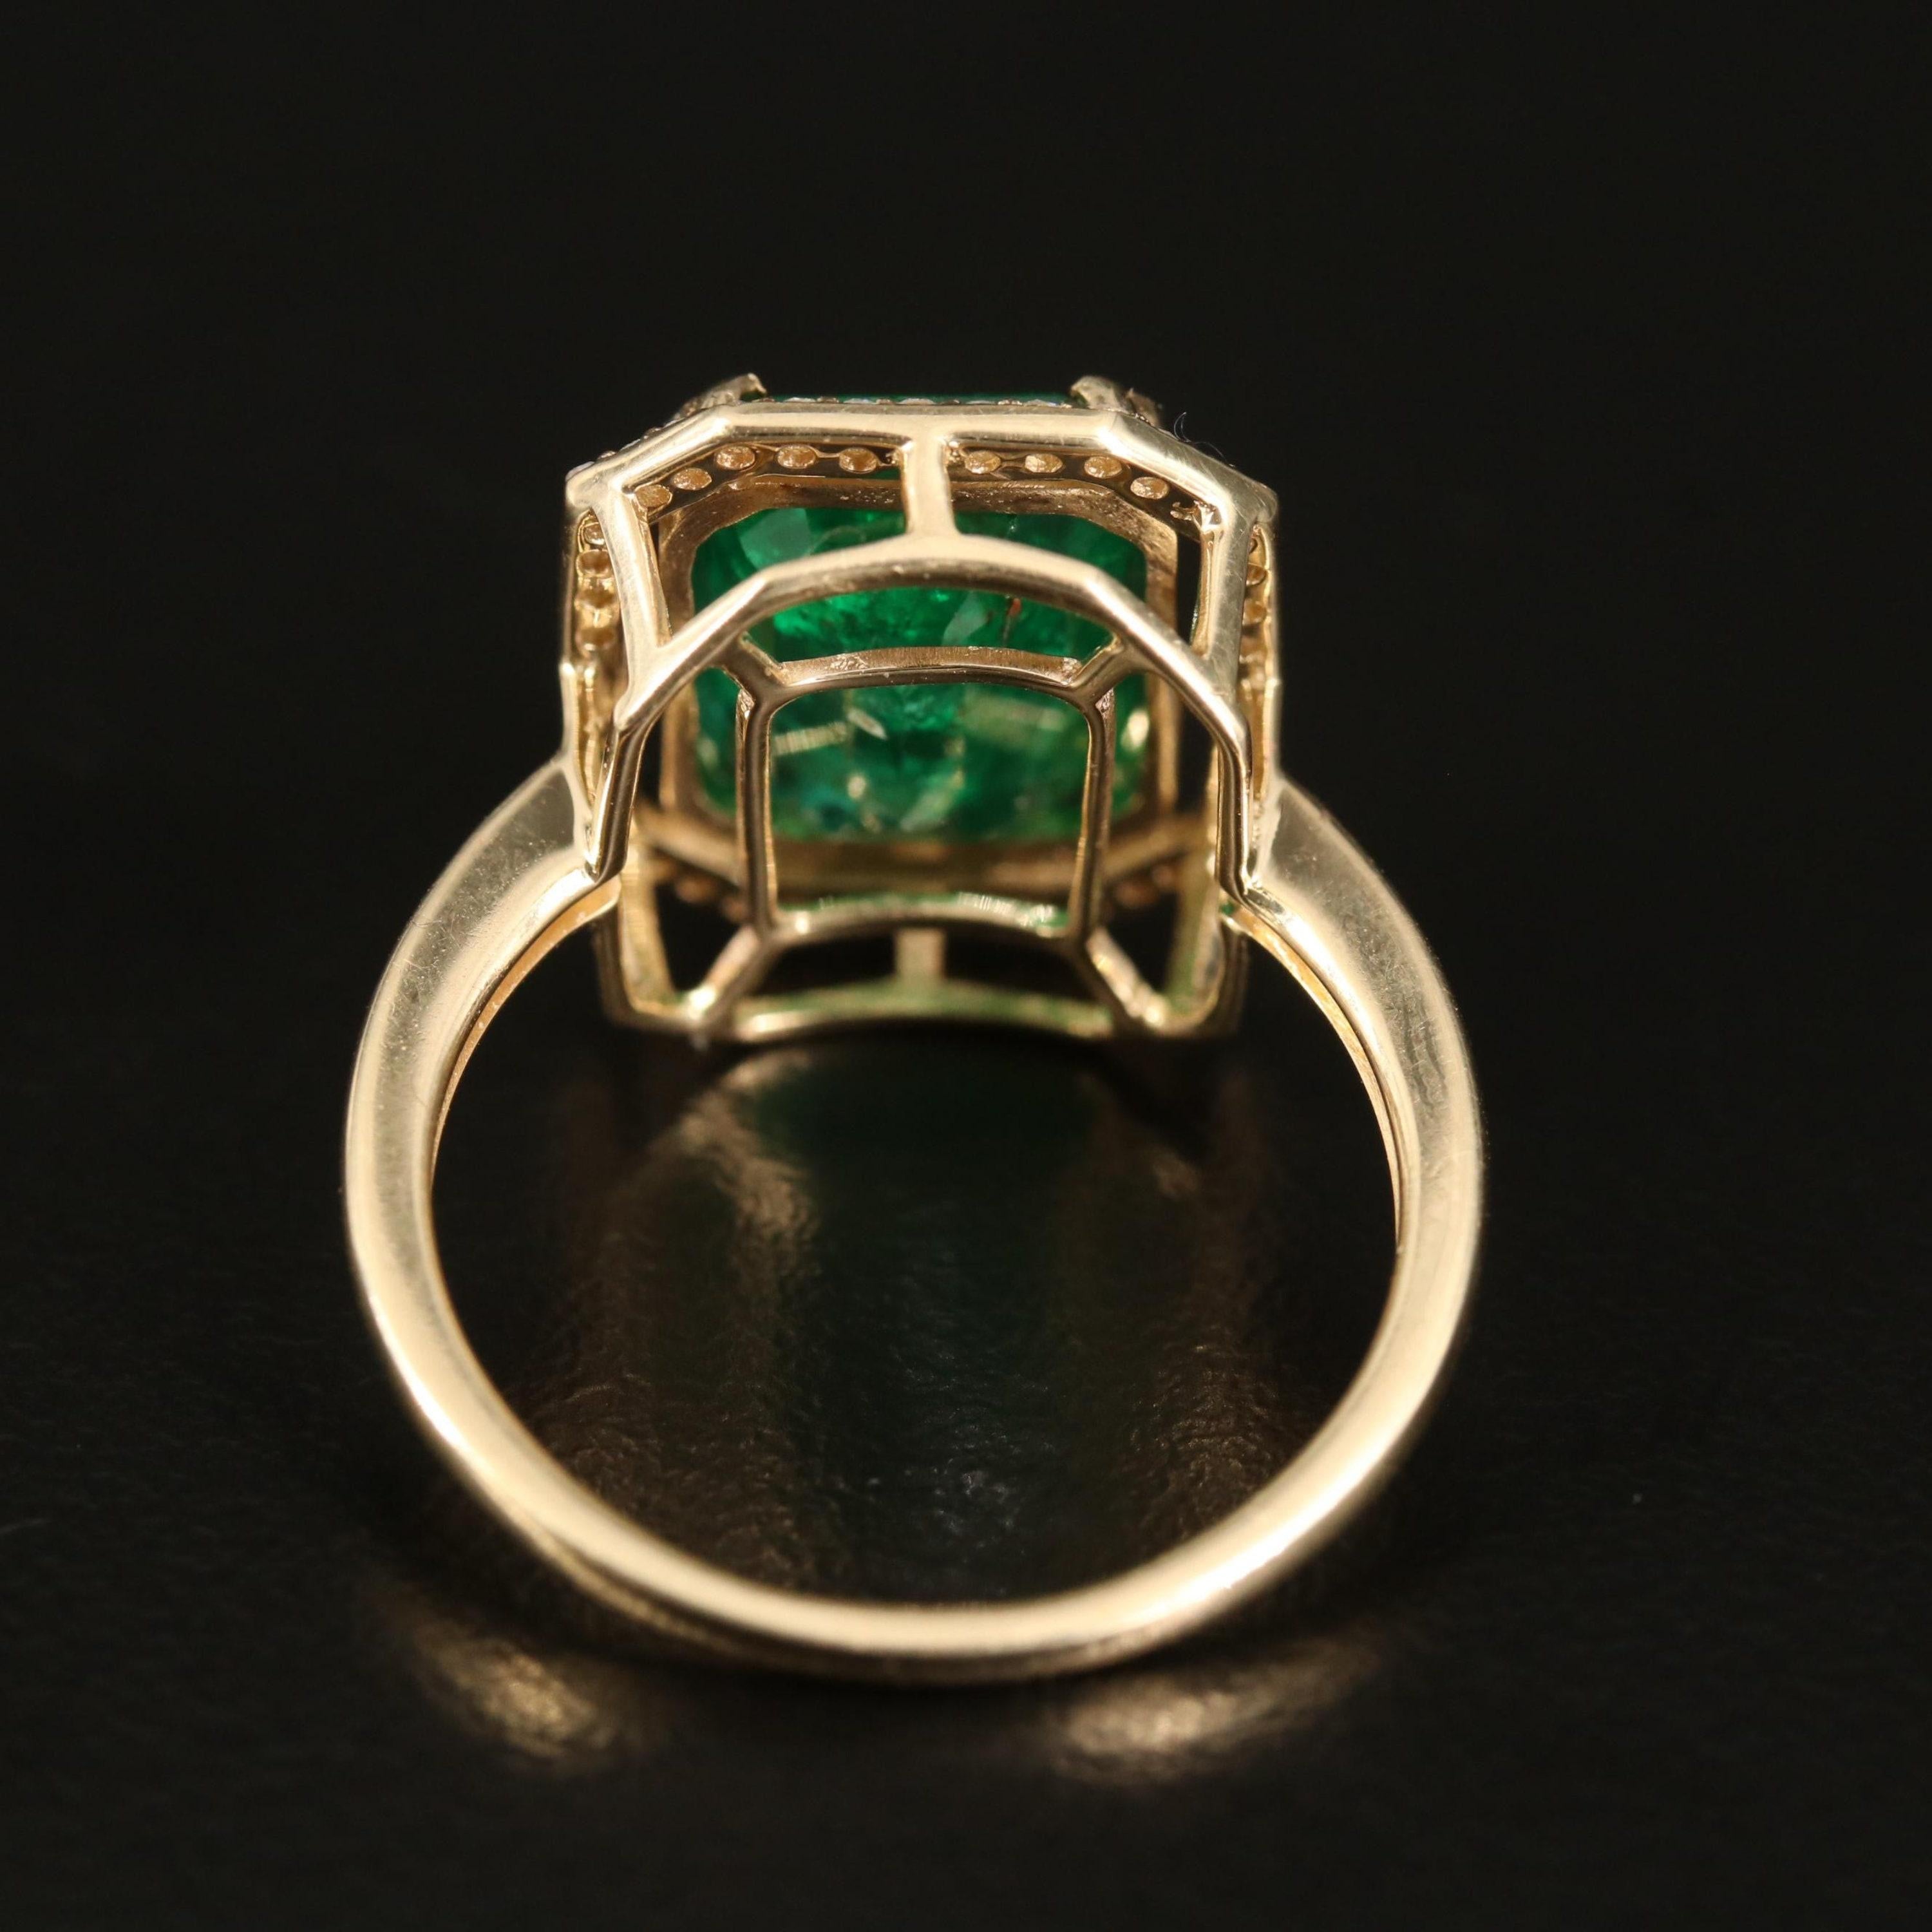 For Sale:  4 Carat Natural Emerald Diamond Engagement Ring Set in 18K Gold, Cocktail Ring 3